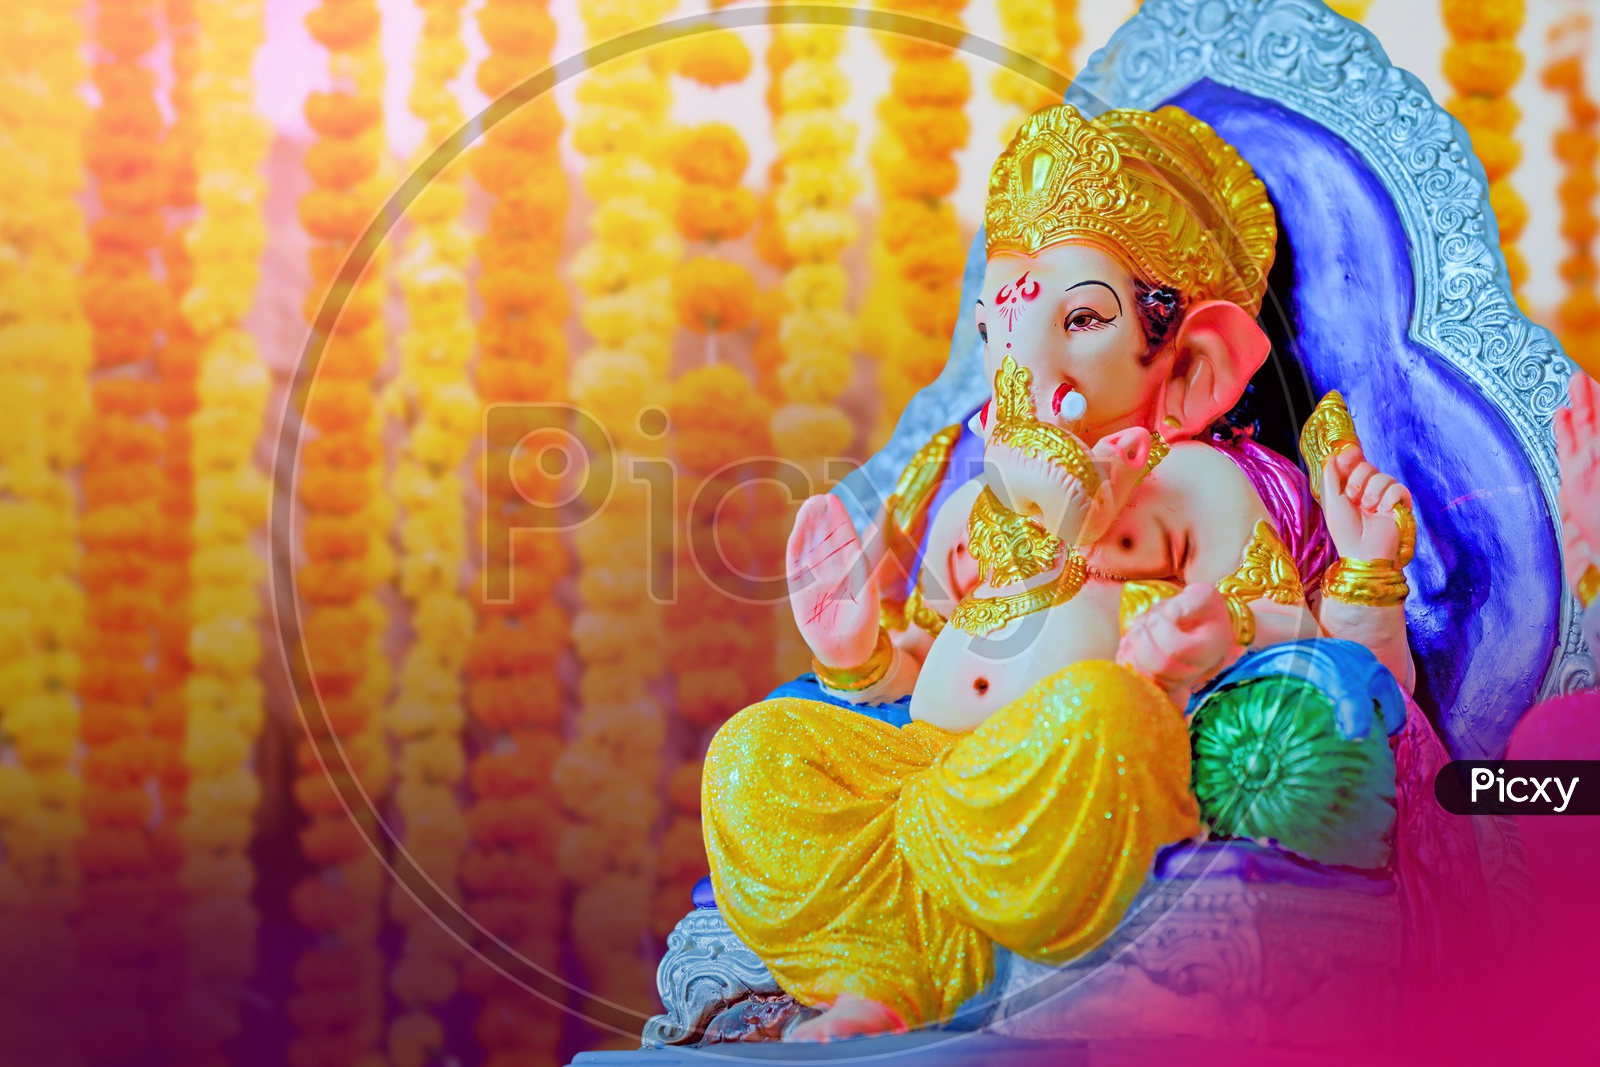 Lord Ganesha Idol with flowers in the background